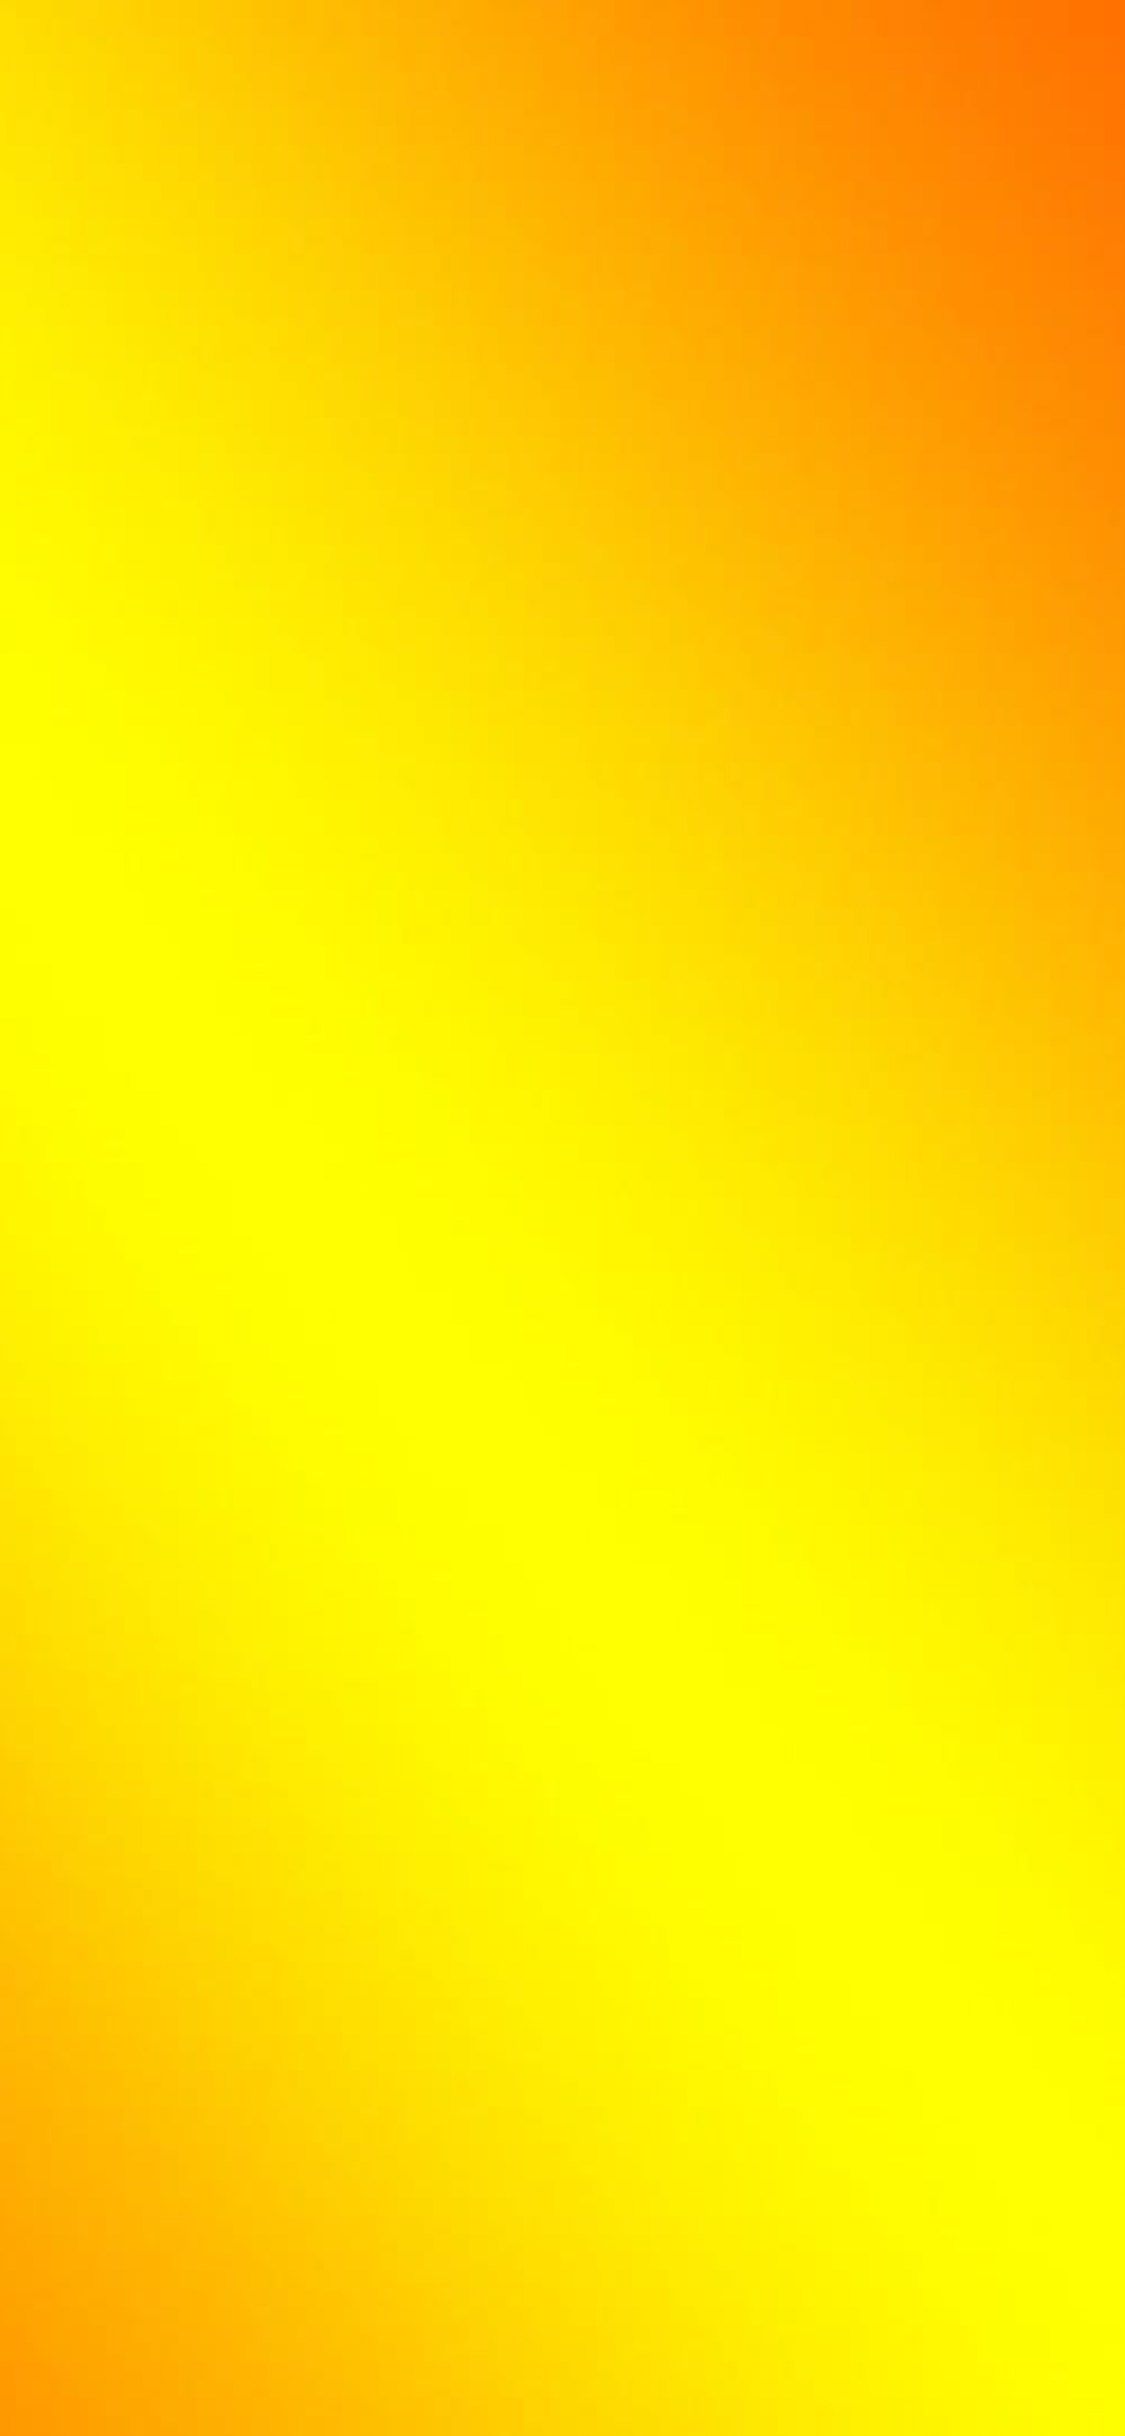 Cool Yellow Wallpapers For Iphone X image